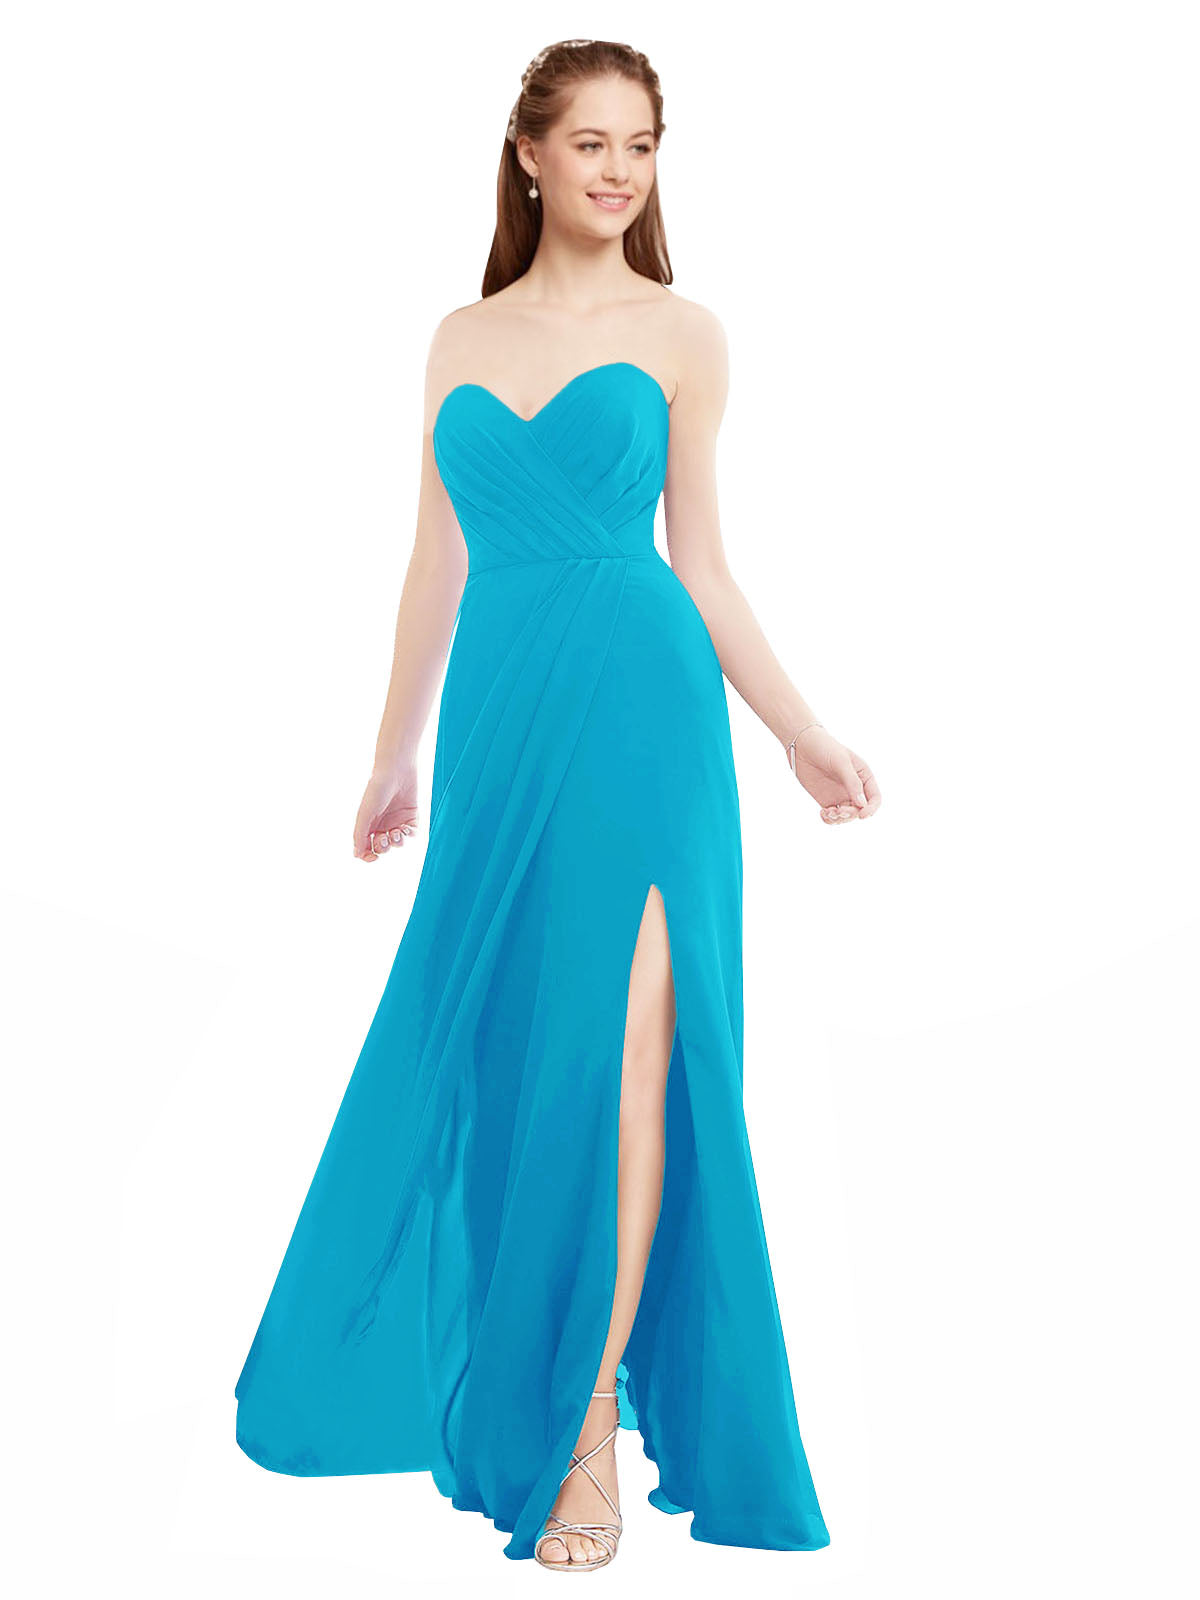 Turquoise A-Line Sweetheart Strapless Sleeveless Long Bridesmaid Dress Meadow